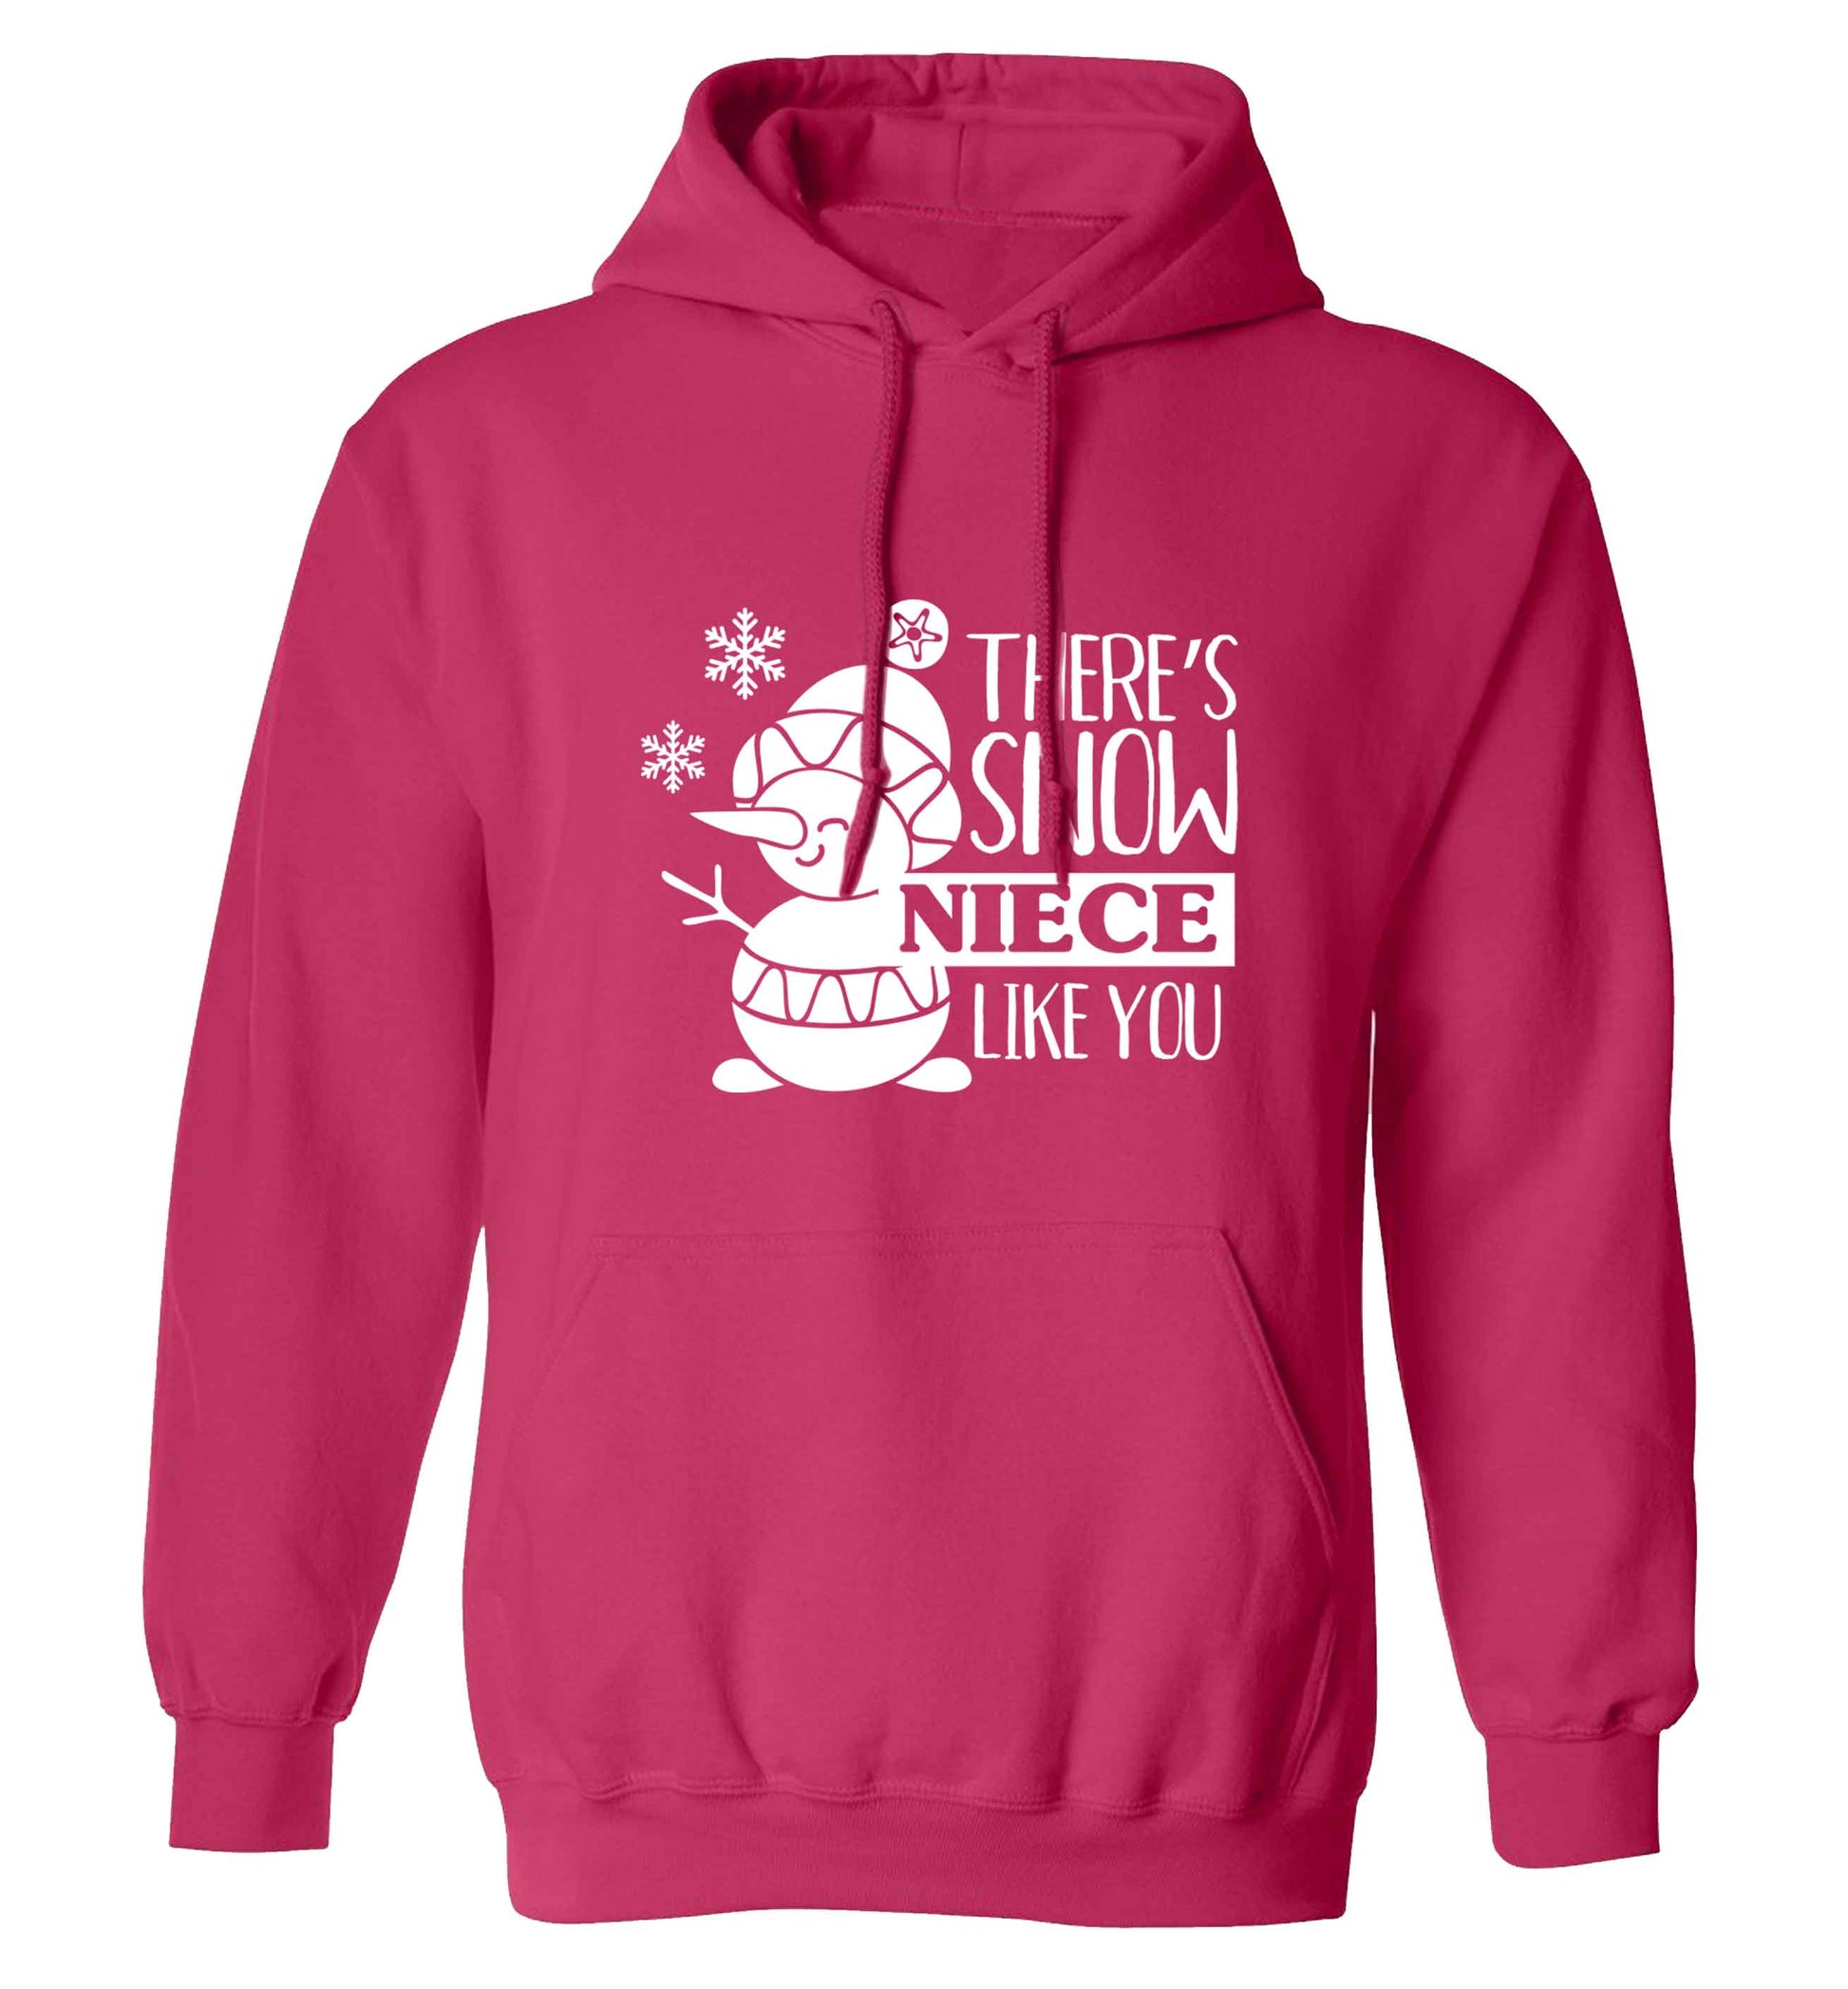 There's snow niece like you adults unisex pink hoodie 2XL